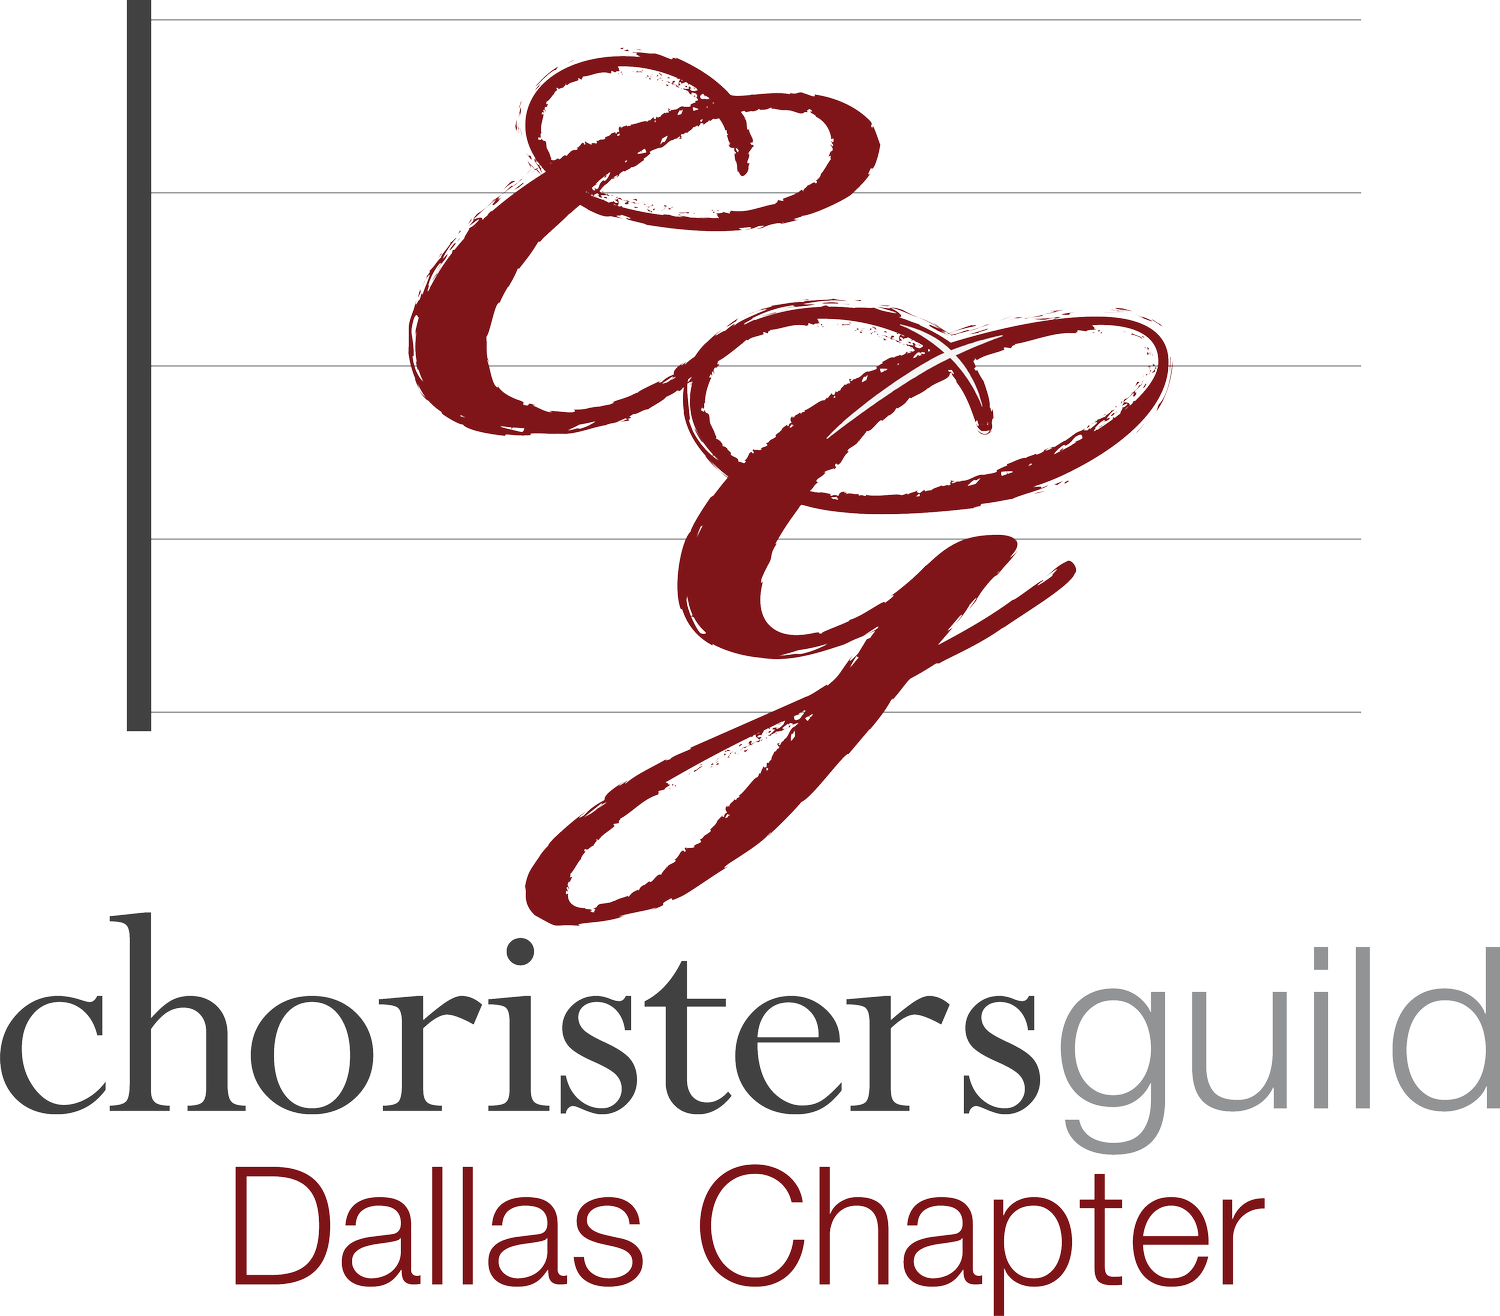 Dallas Chapter Choristers Guild